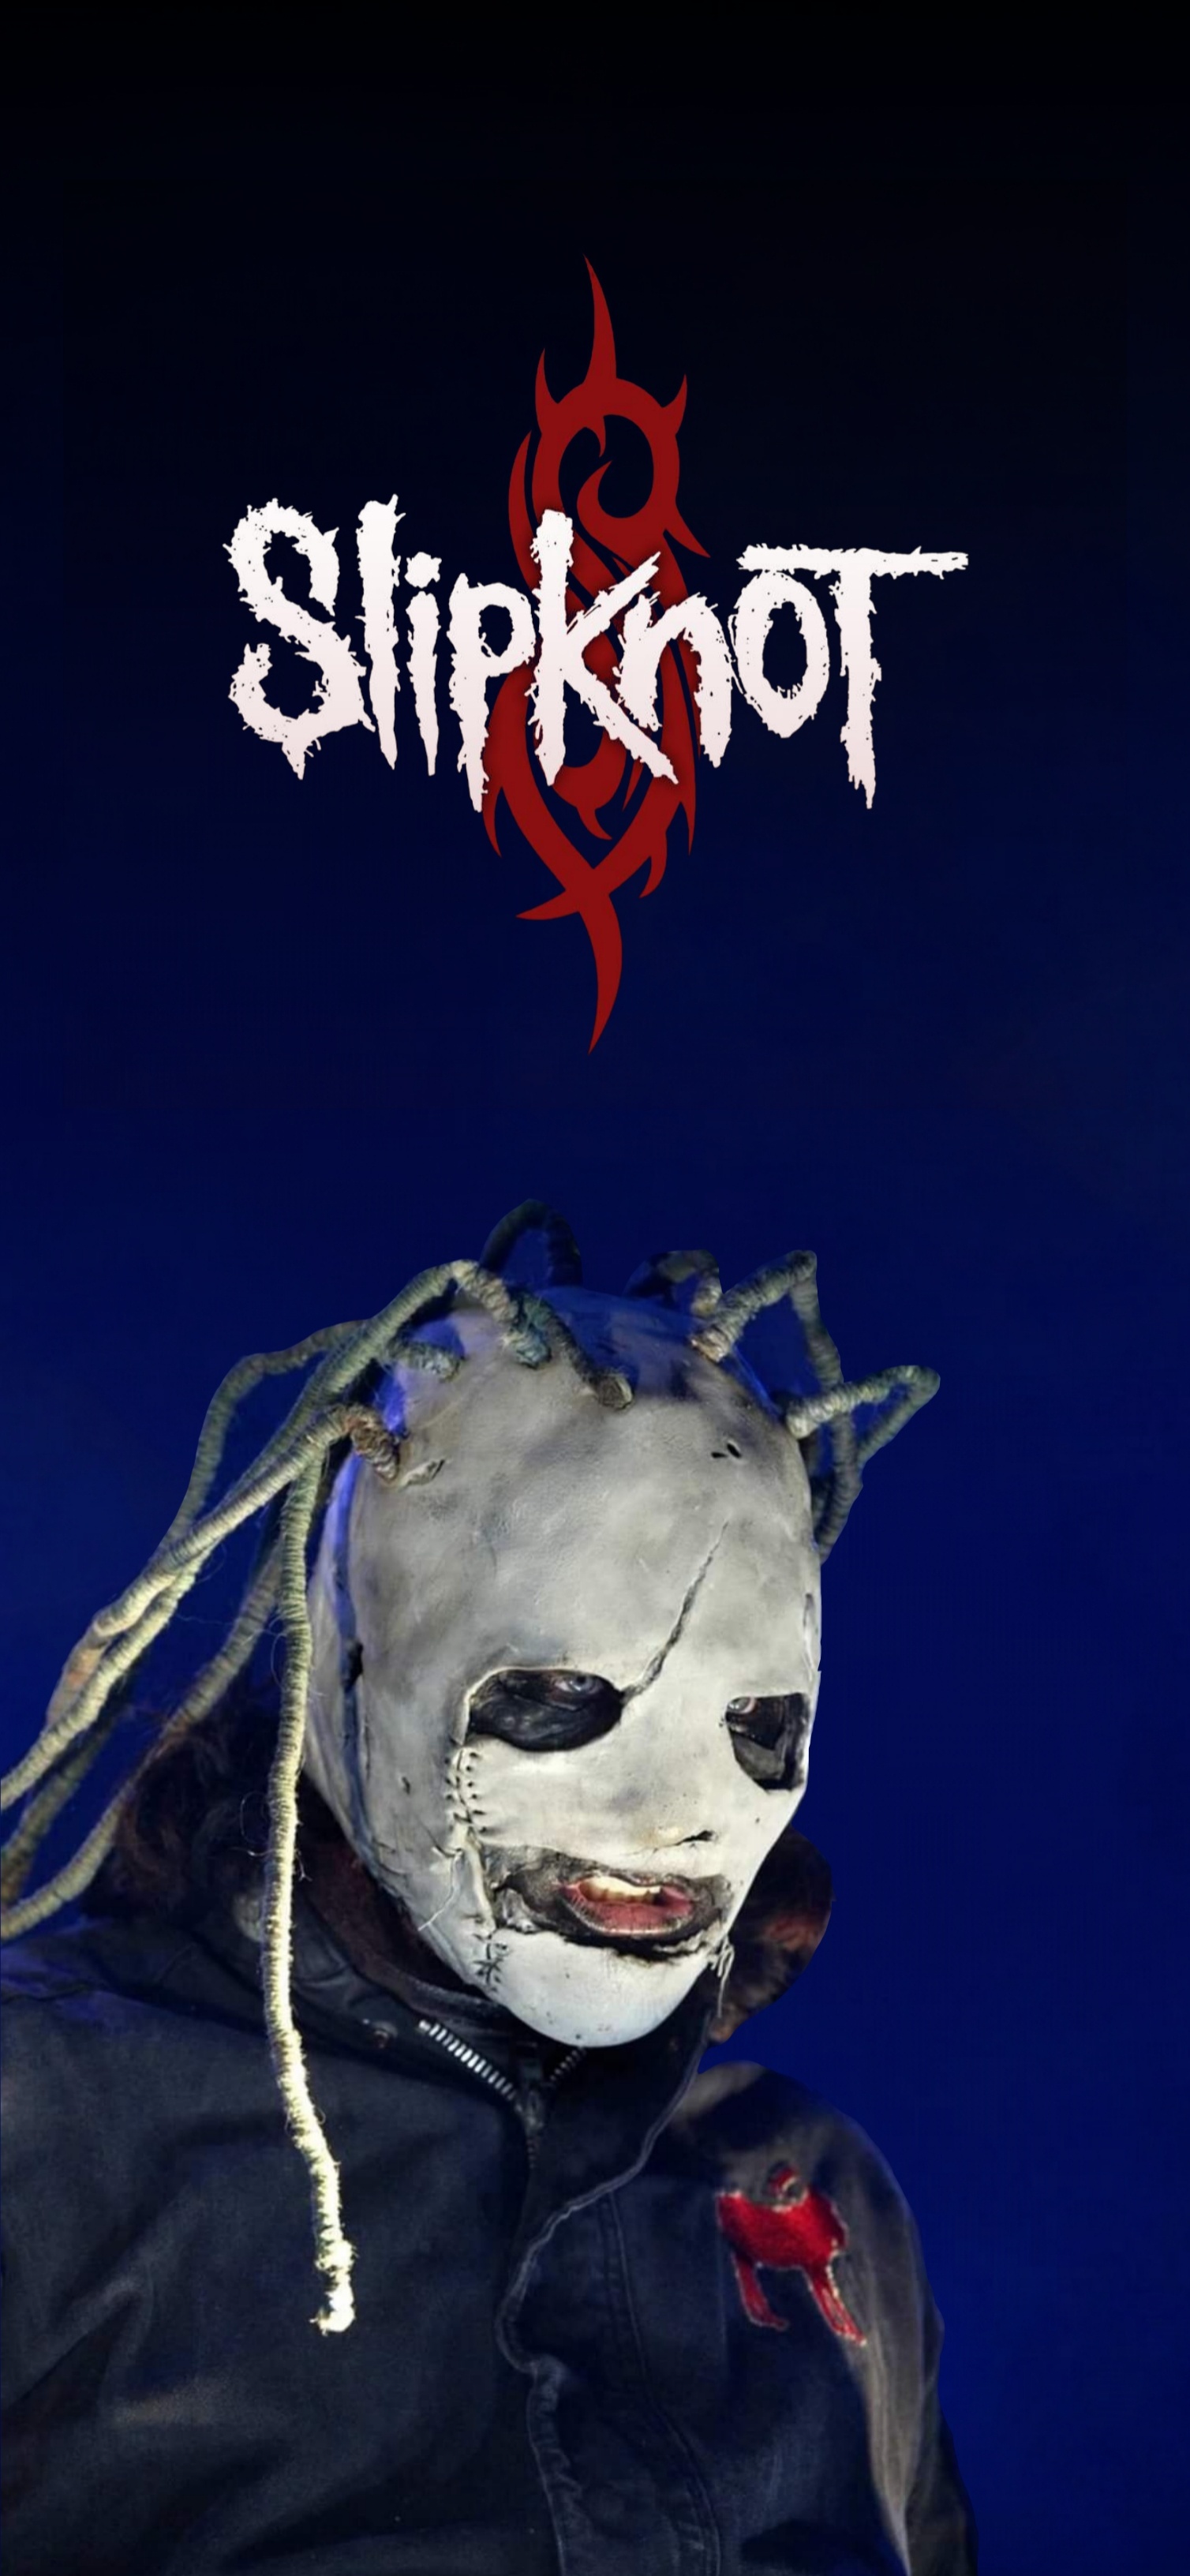 There are some of my wallpaper projects. Hope you'll like it : r/Slipknot 1510x3270